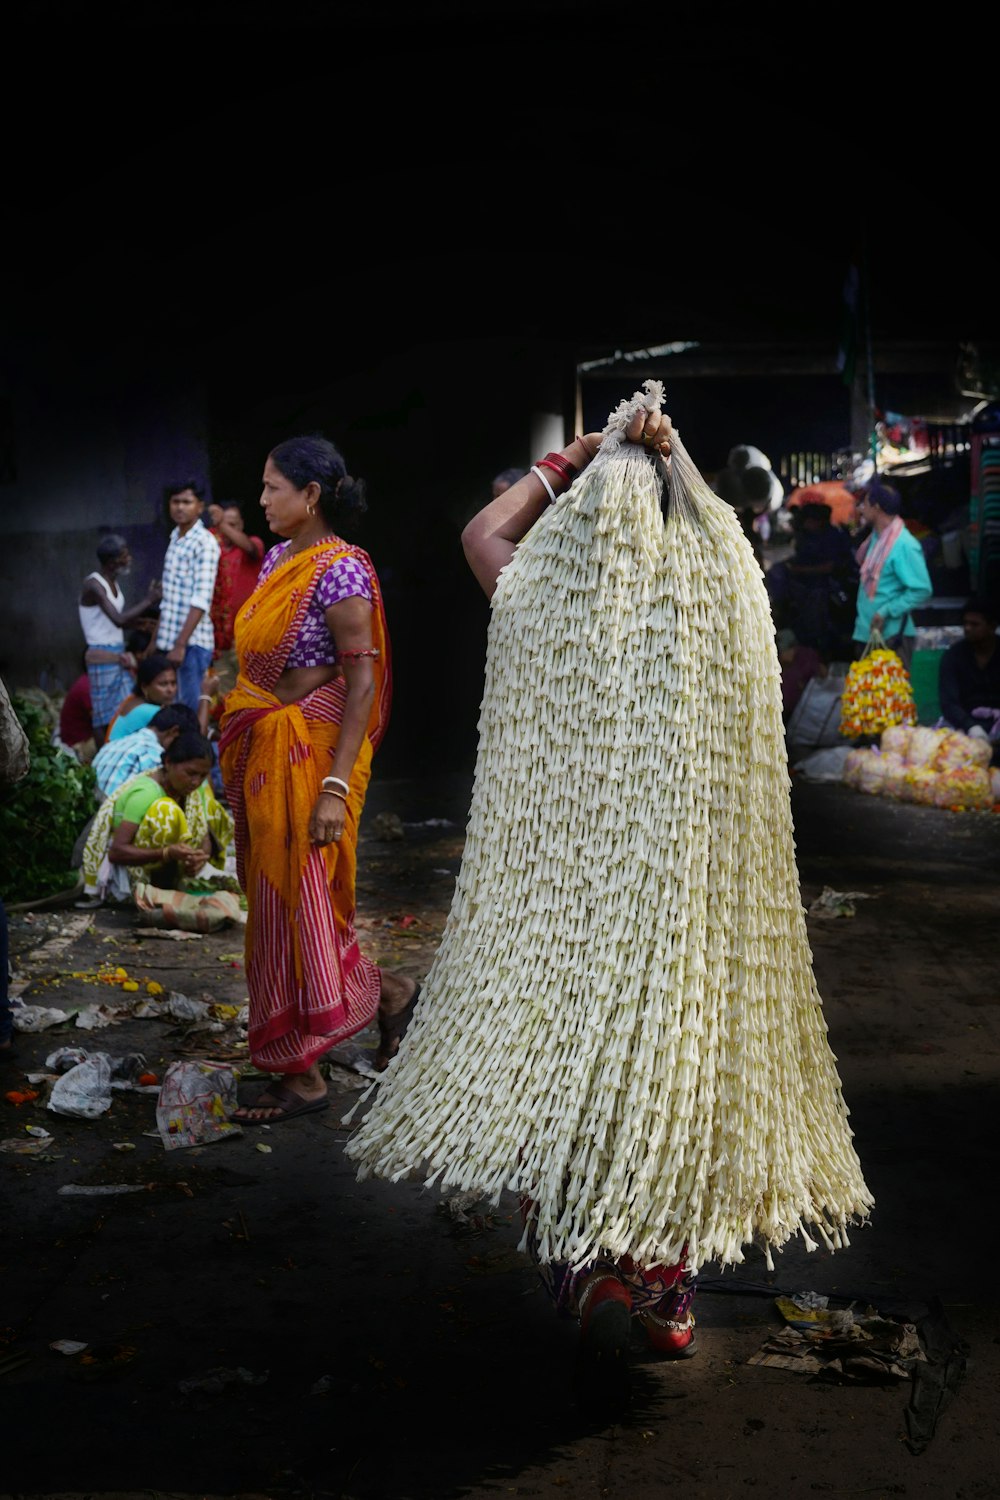 a woman in a sari holding a large bag of flowers